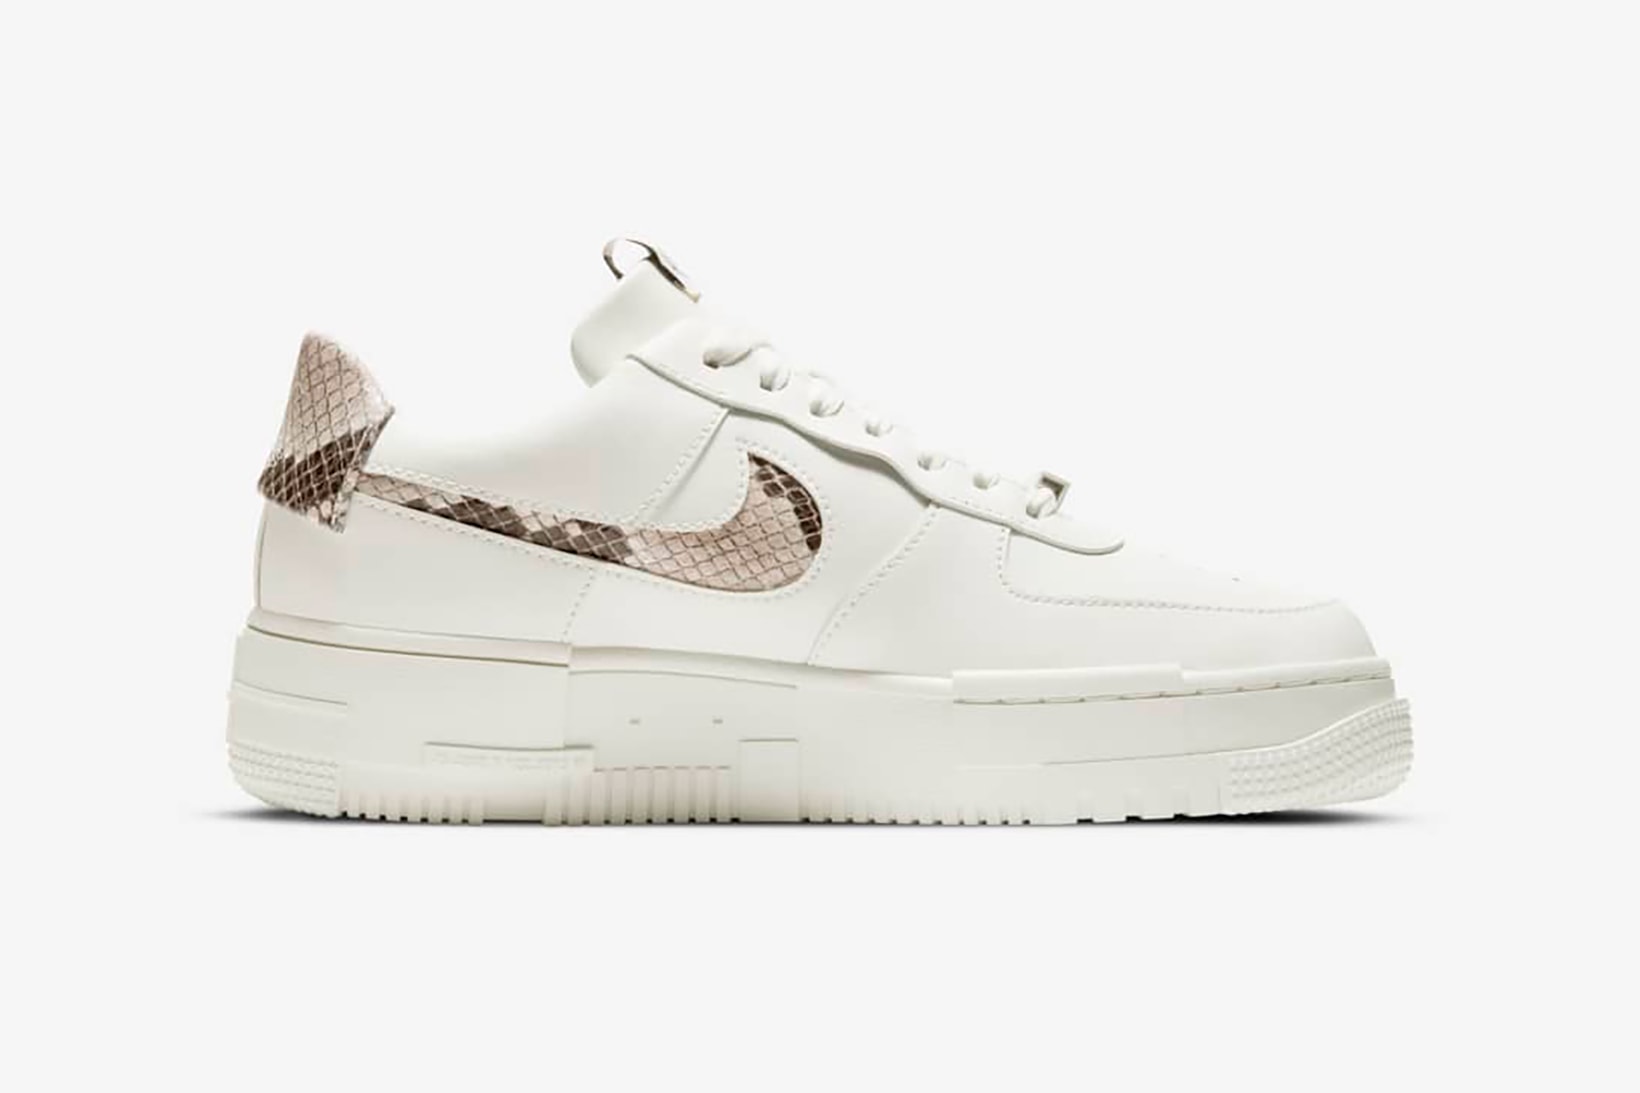 nike air force 1 pixel womens sneakers sail snake skin pattern white colorway sneakerhead footwear shoes laces lateral